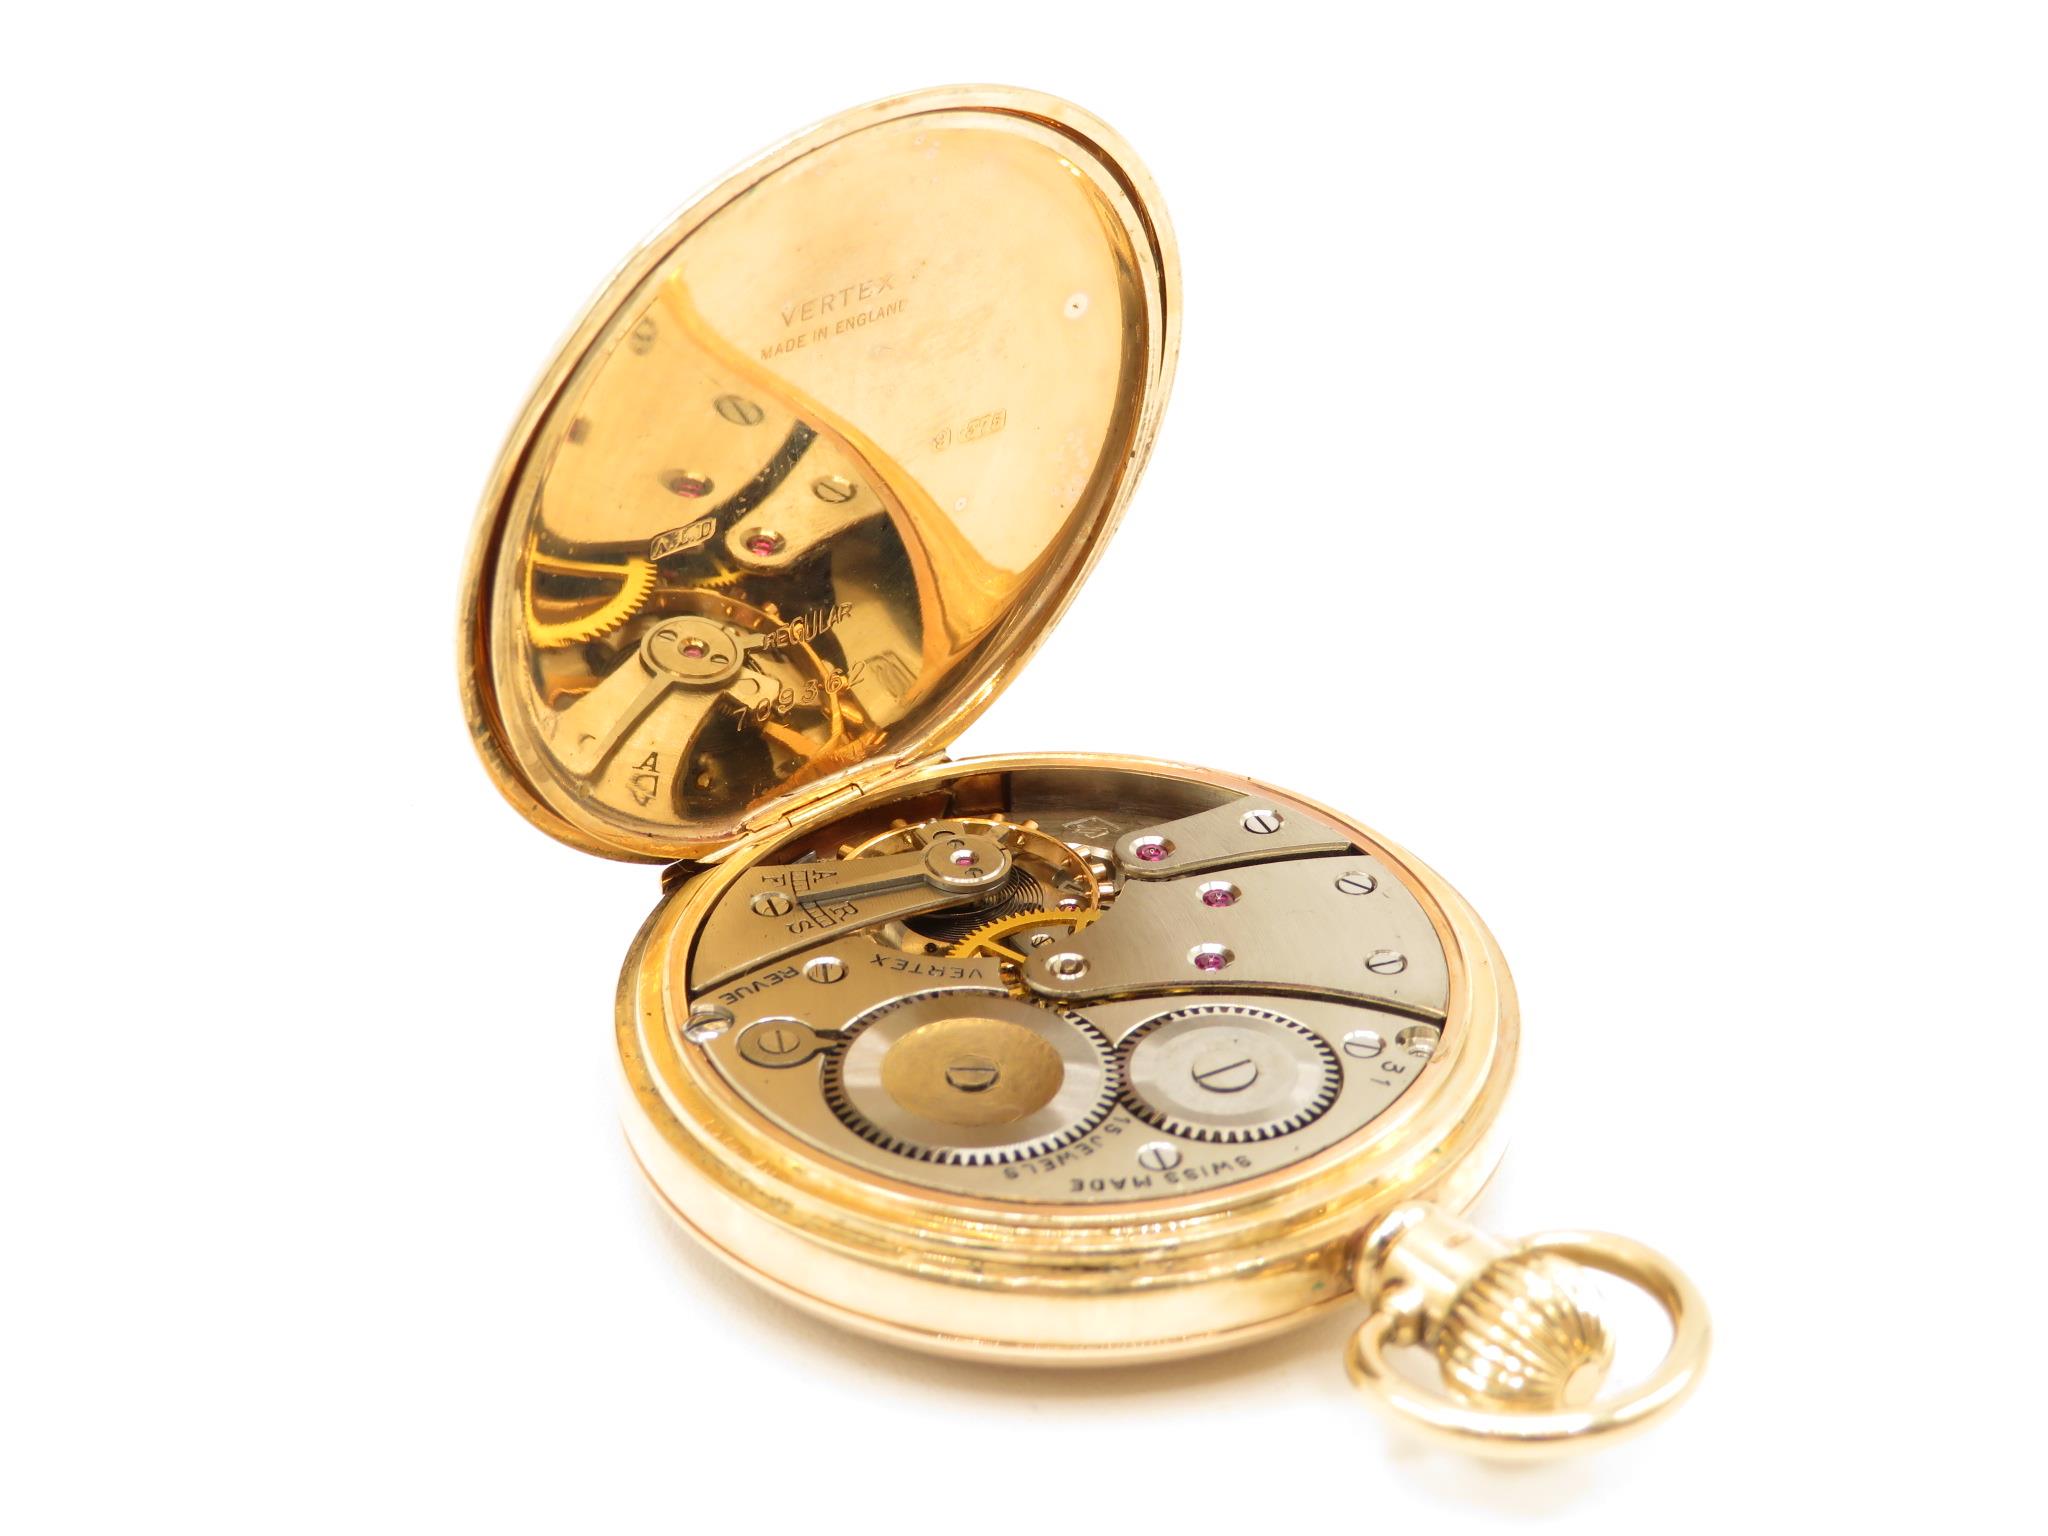 9ct gold gent's pocket watch by Vertex for Asprey signed 50 years loyal service J Summers and Sons - Image 4 of 9